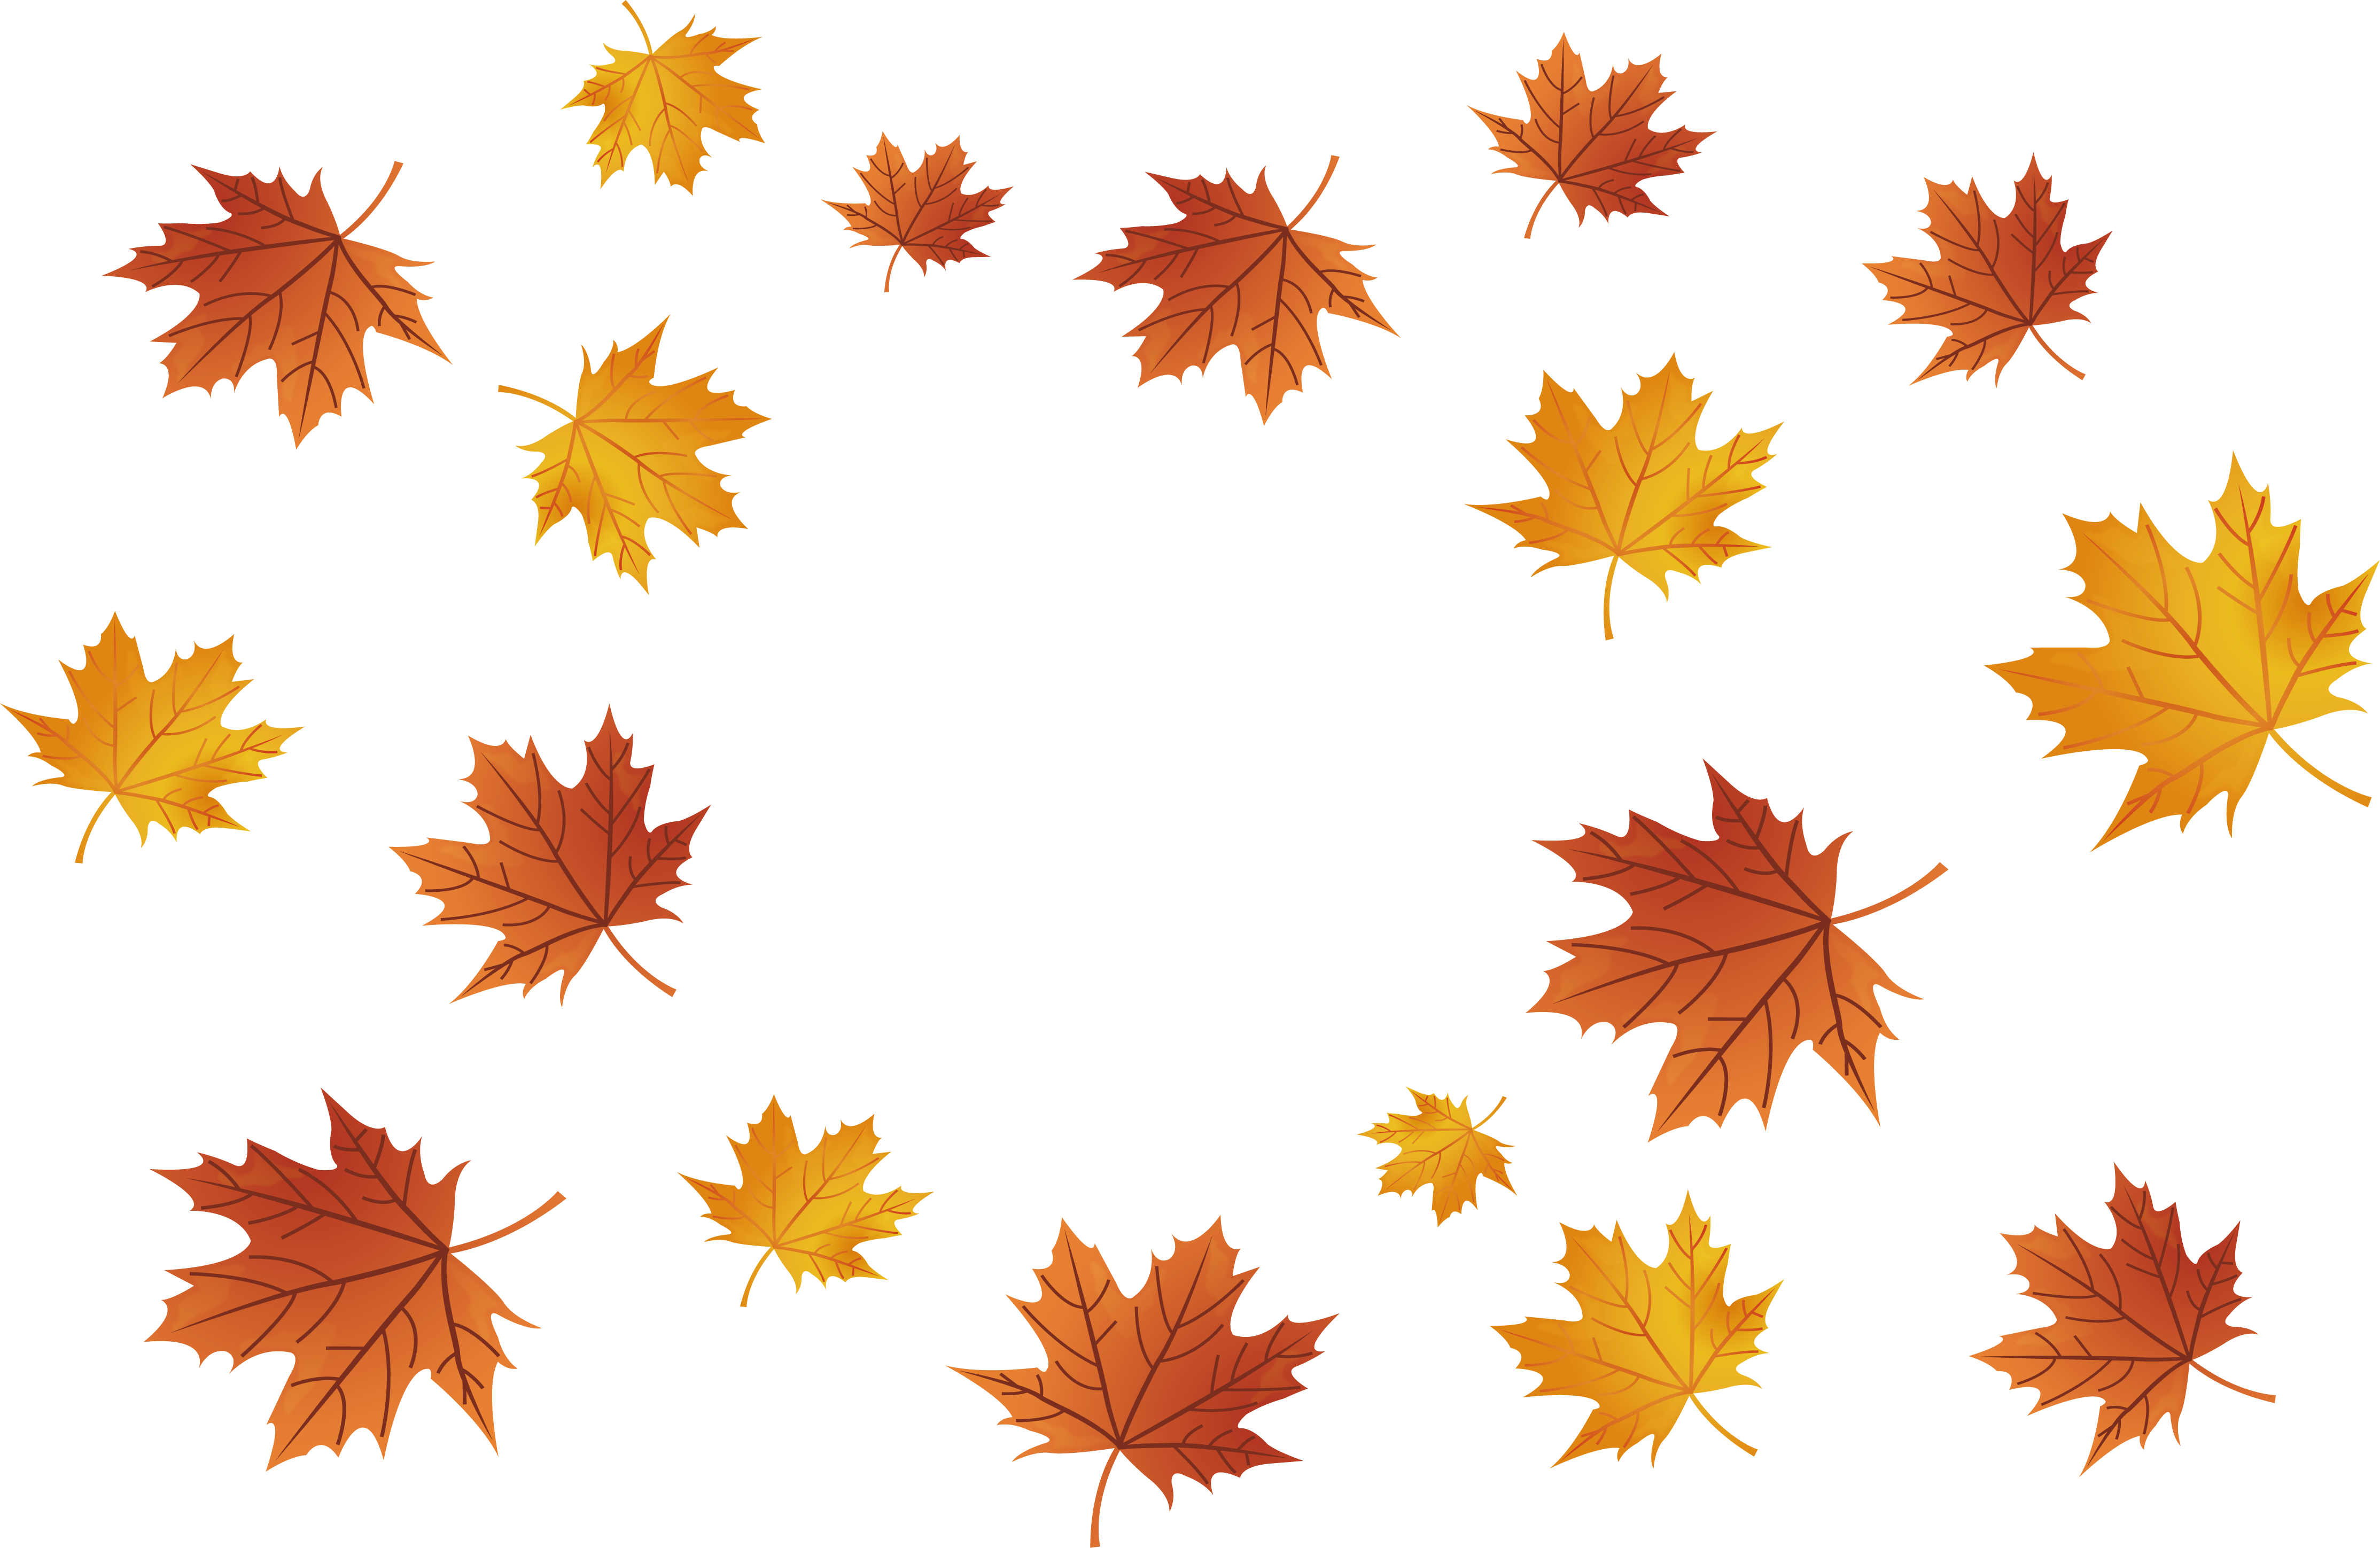 Maple Leaf Maple Leaves Falling Png Download 4454 2897 Free Transparent Maple Leaf Png Download Clip Art Library